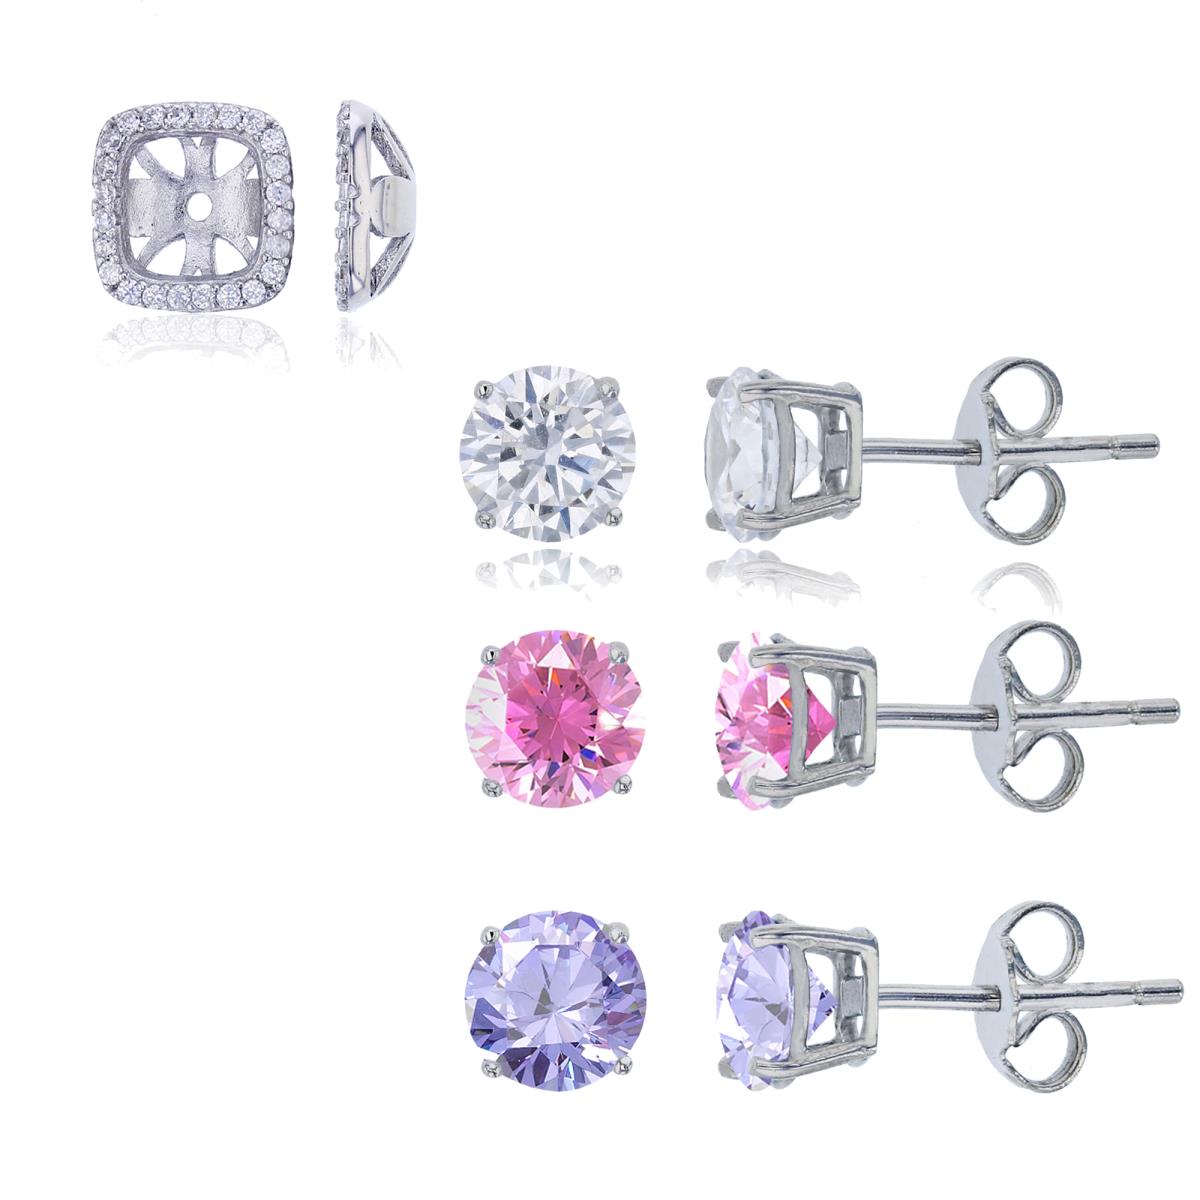 Sterling Silver Rhodium 6mm White, Pink & Lavender Solitaire Stud Earrings & Cushion Jacket Set